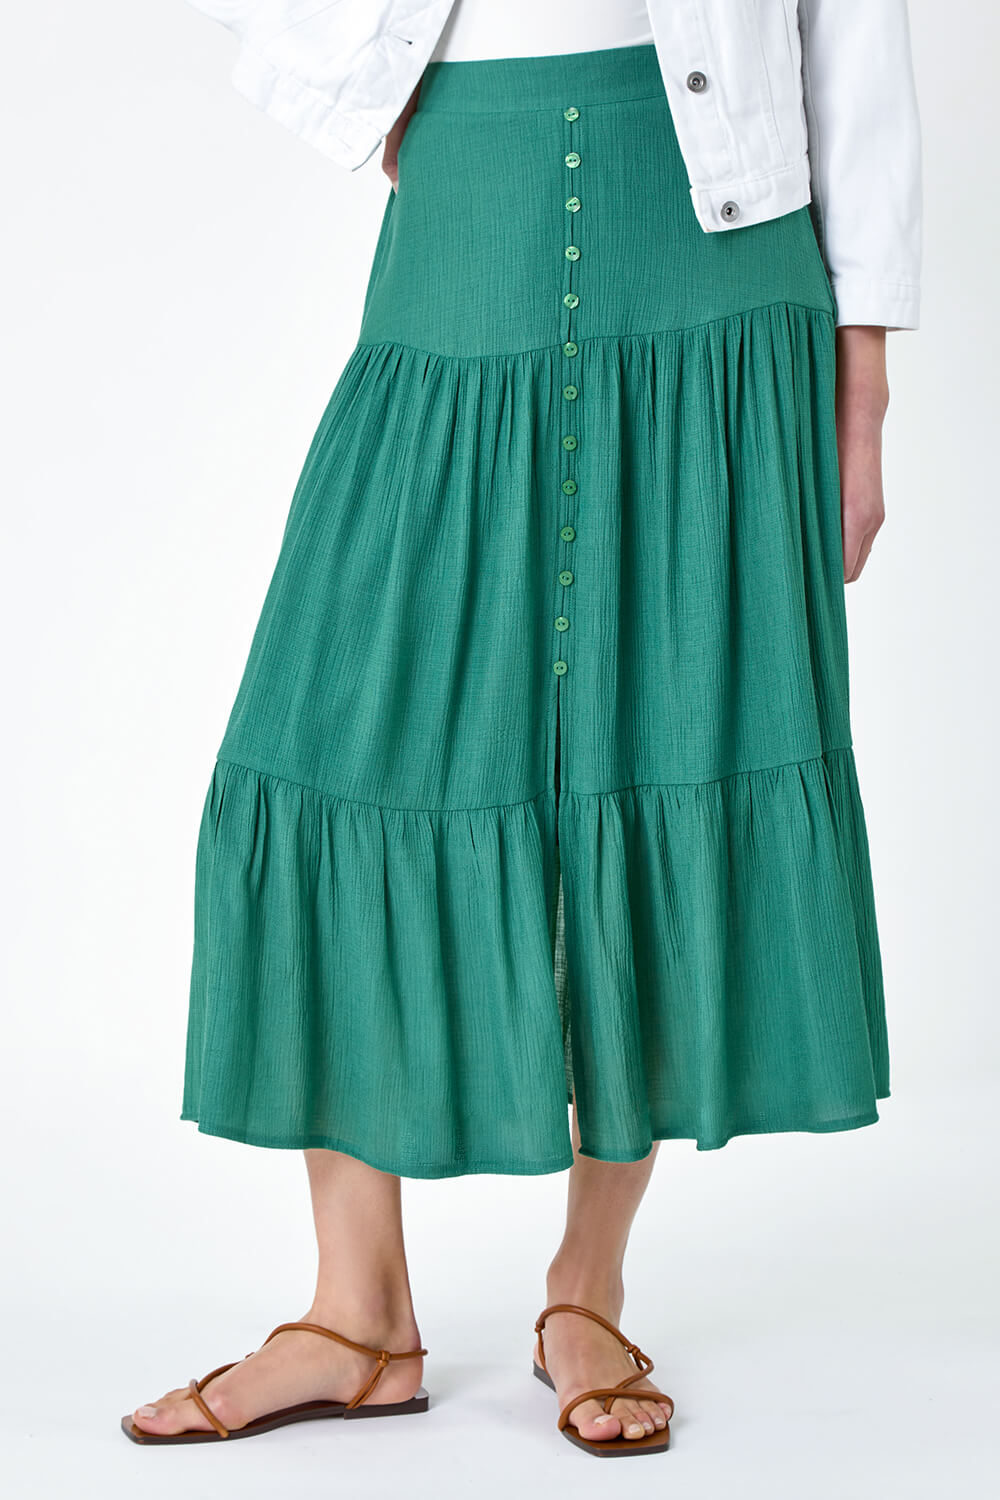 Green Textured Button Tiered Midi Skirt, Image 4 of 5